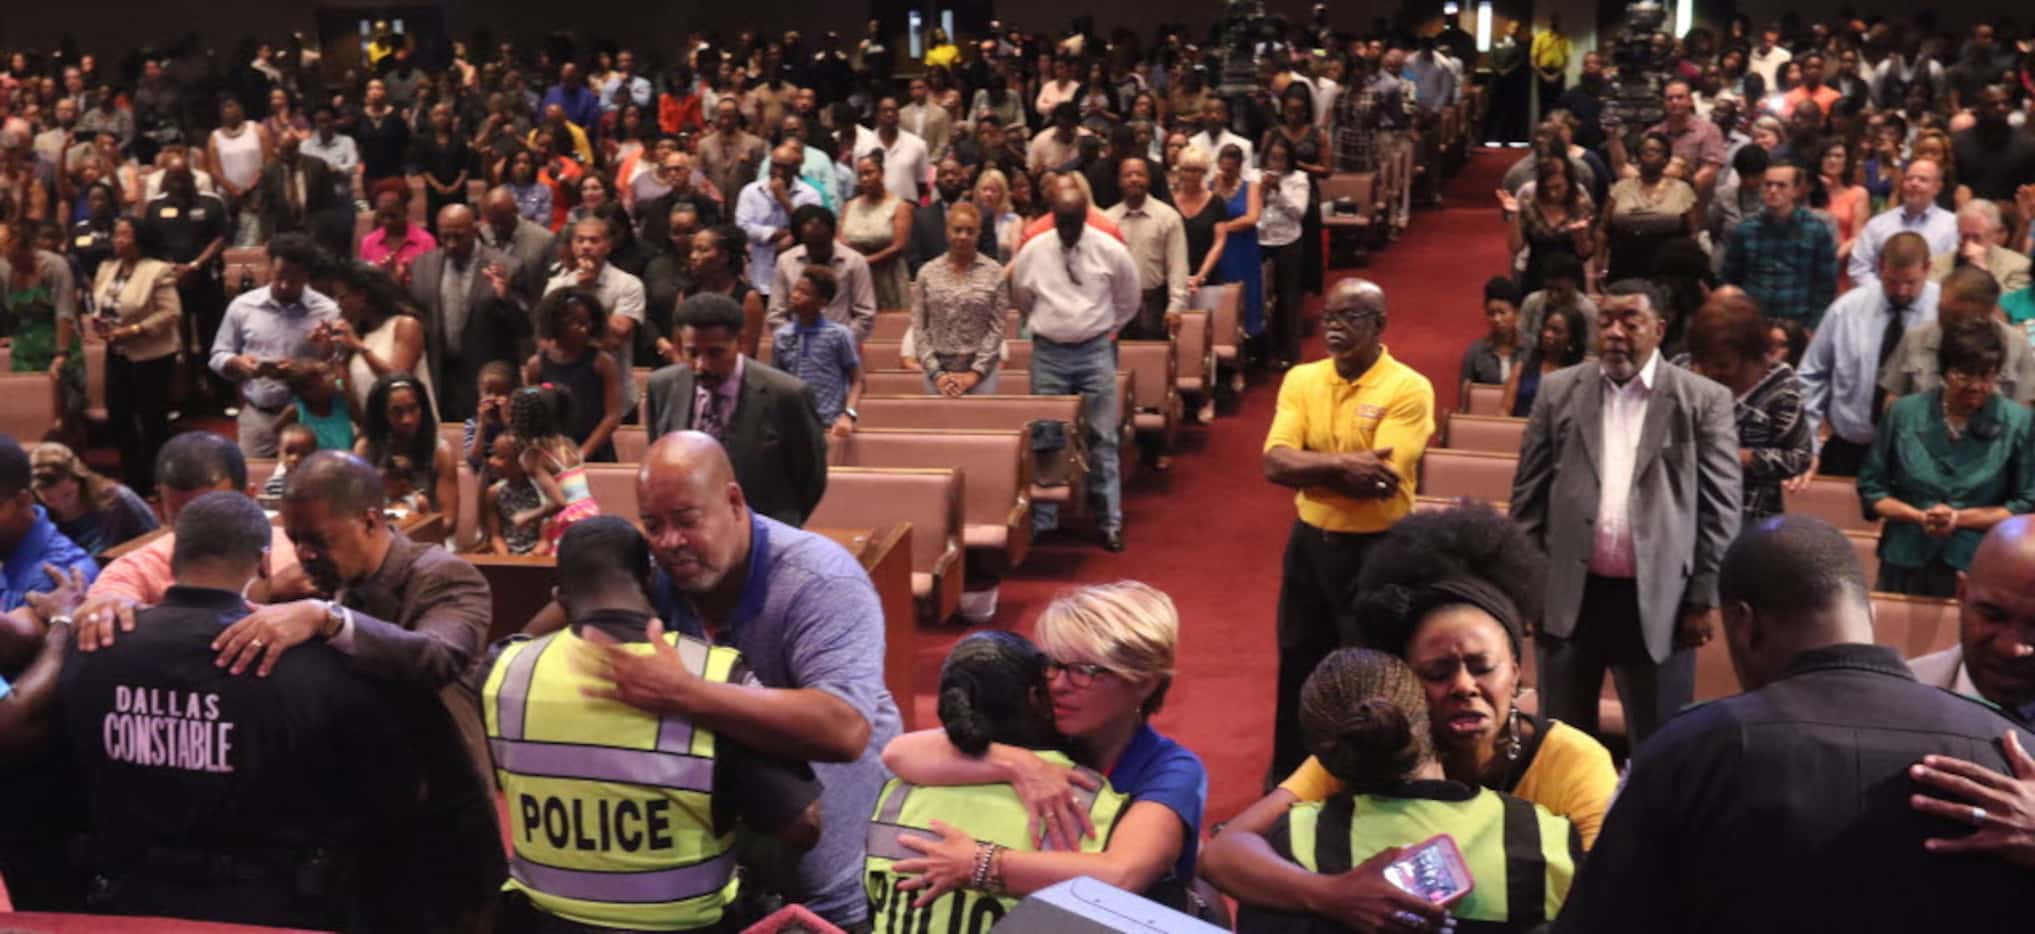 Dr. Tony Evans and members of Oak Cliff Bible Fellowship pray for law enforcement officers...